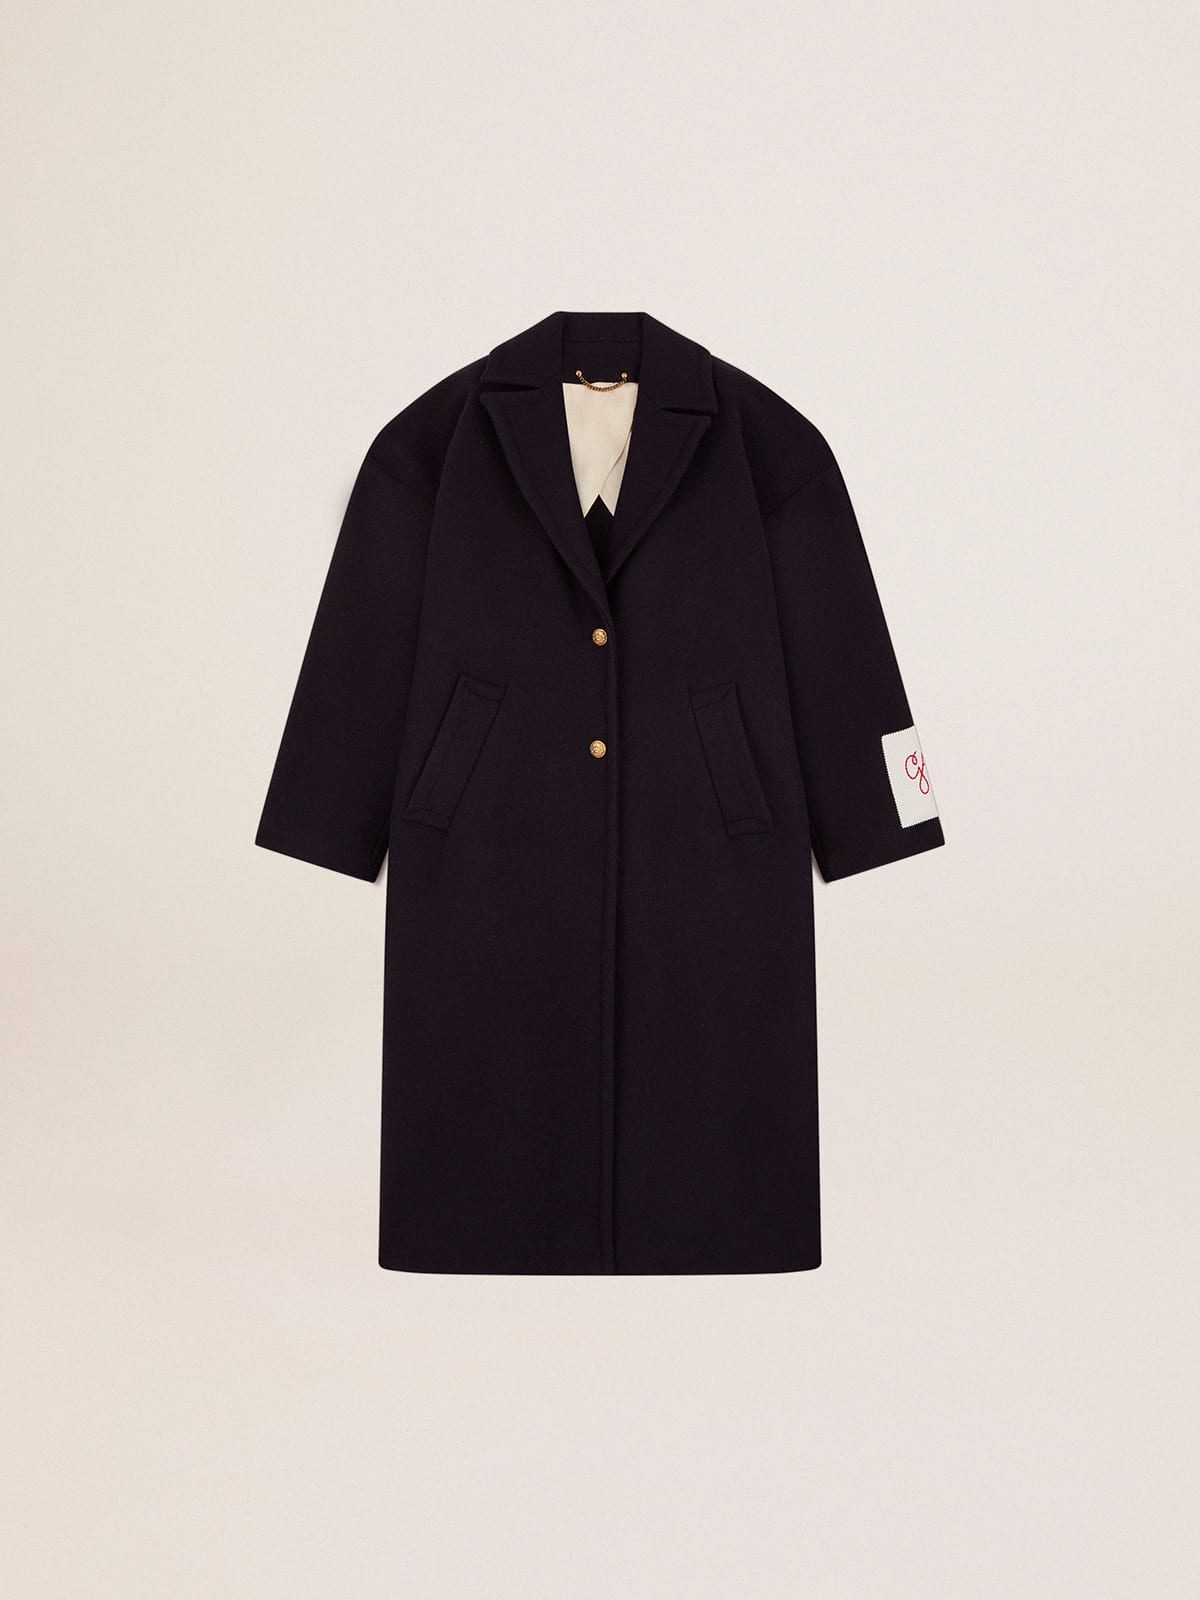 Single-breasted cocoon coat in dark blue wool with gold-colored buttons